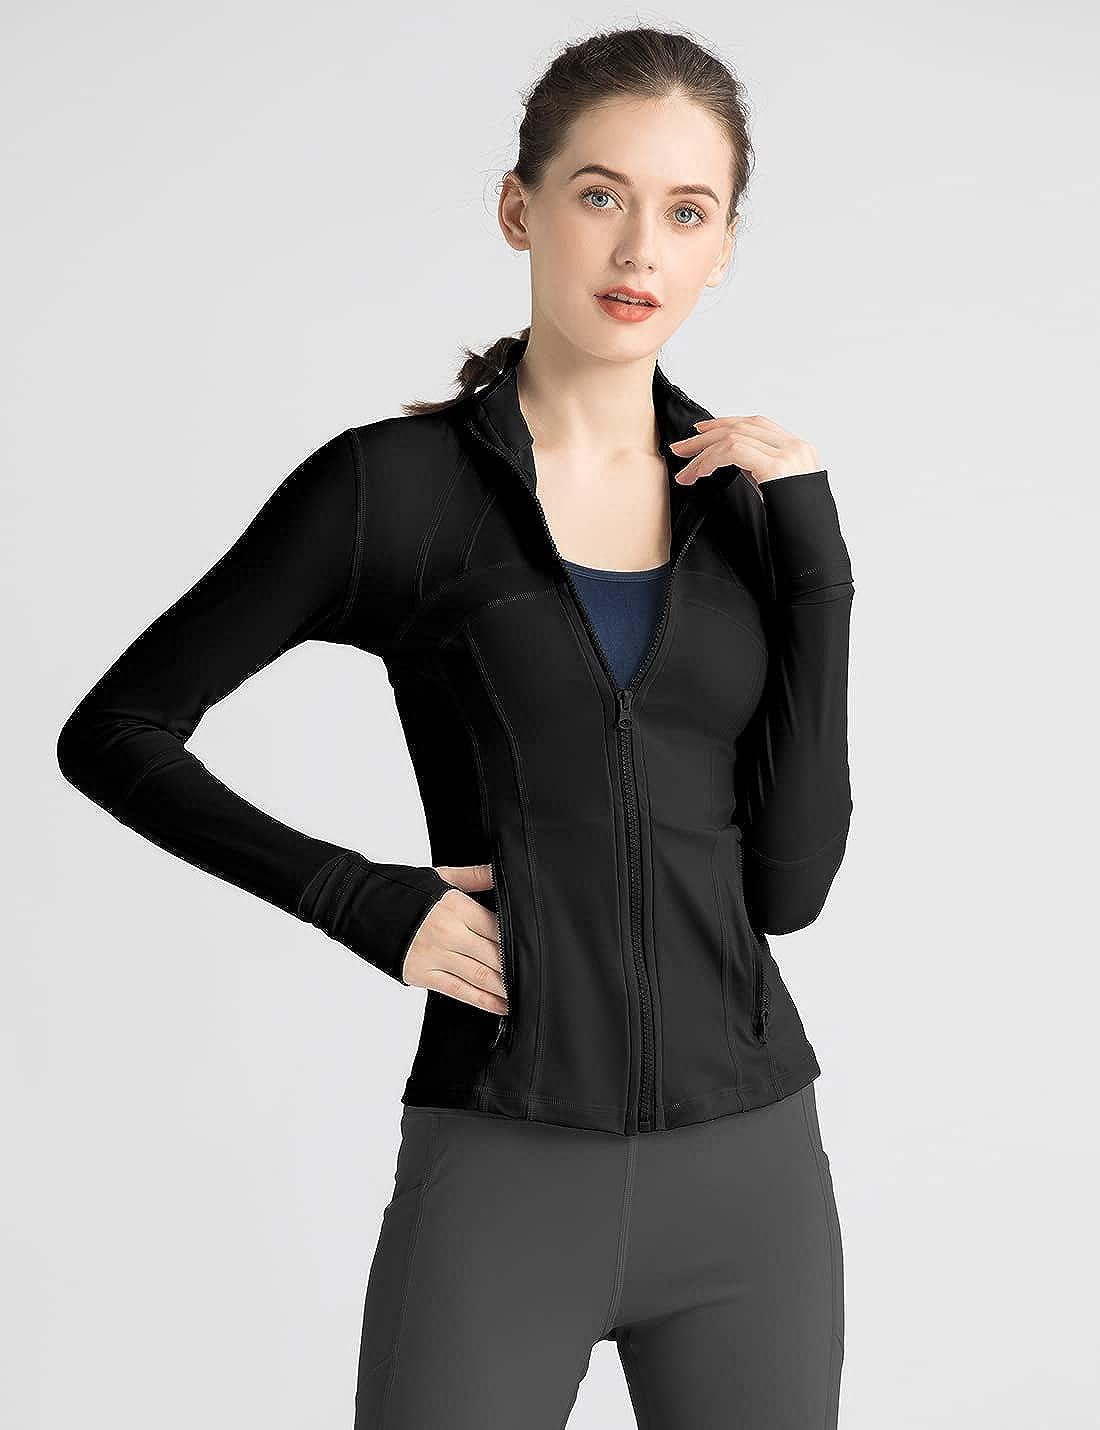 Gacaky Women's Slim Fit Workout Running Track Jackets Full Zip-up